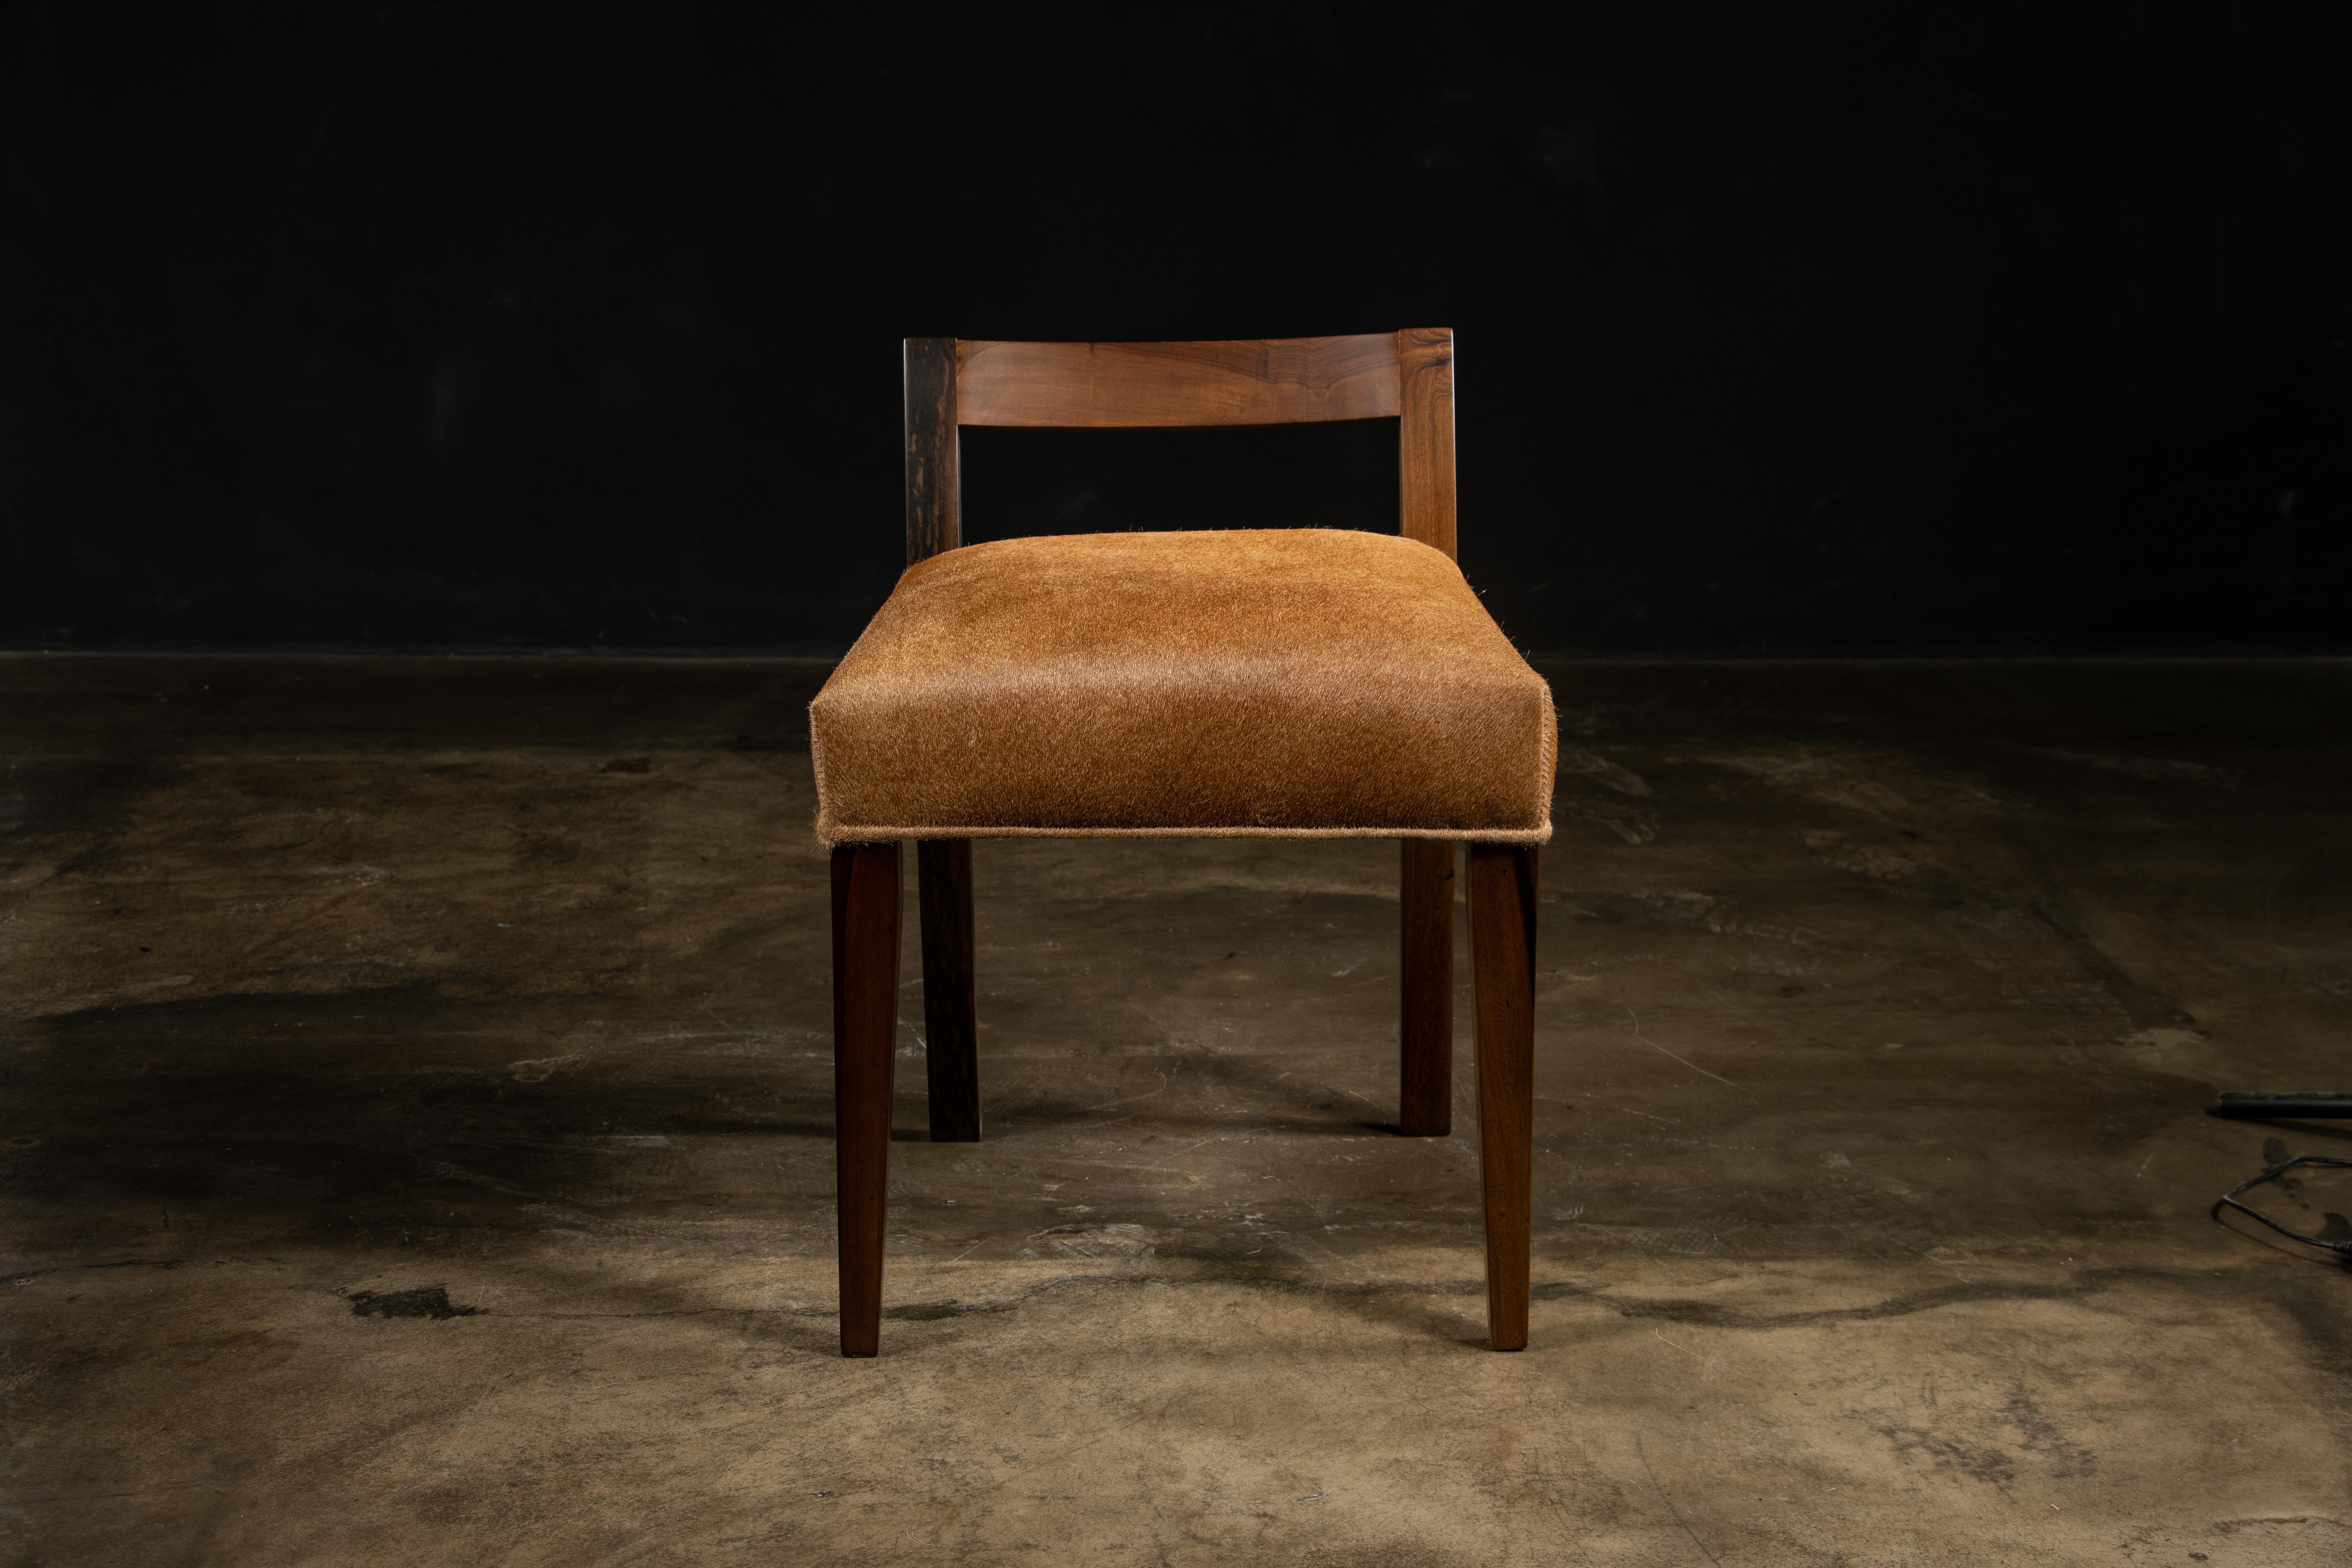 Contemporary Modern Low Side Chair in Exotic Wood & Hair Hide from Costantini, Umberto  For Sale